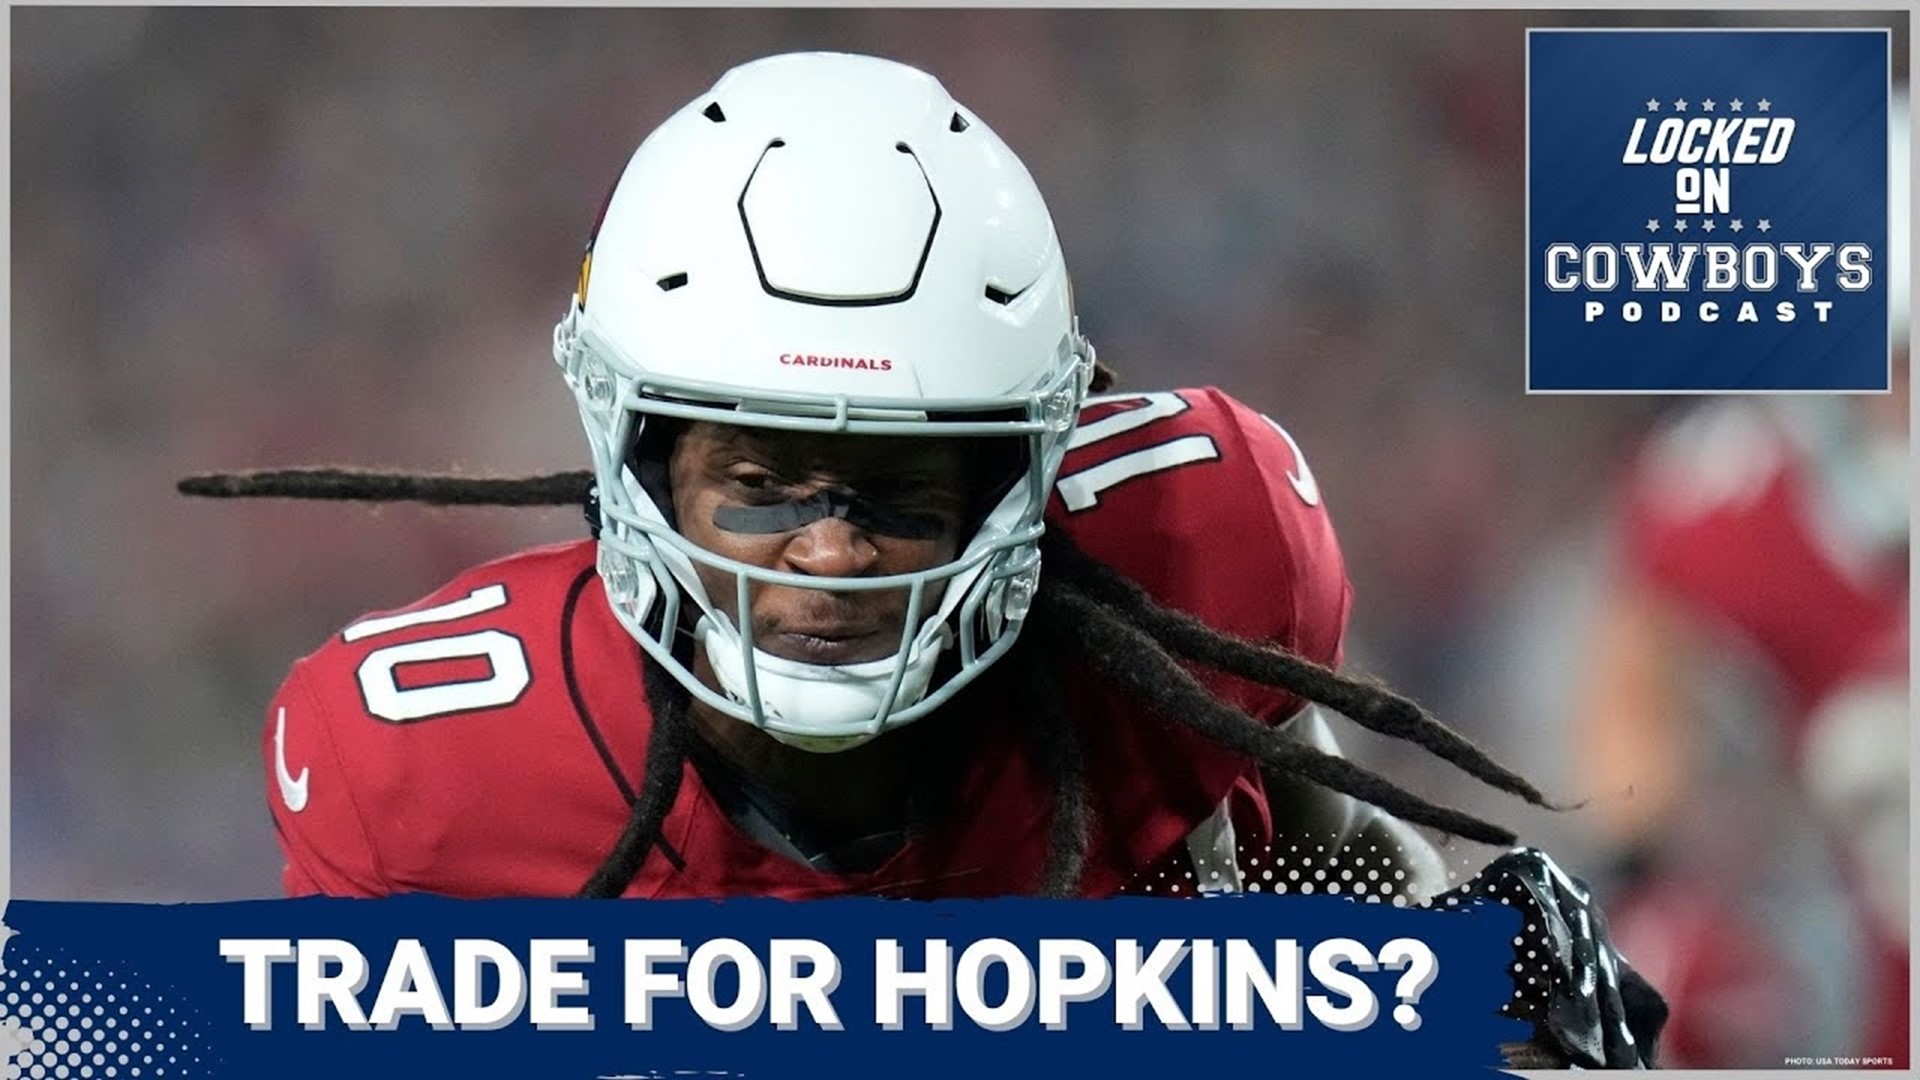 Marcus Mosher and Landon McCool discuss if the Dallas Cowboys should trade for All-Pro WR DeAndre Hopkins. How close is he to being done and what would it take?